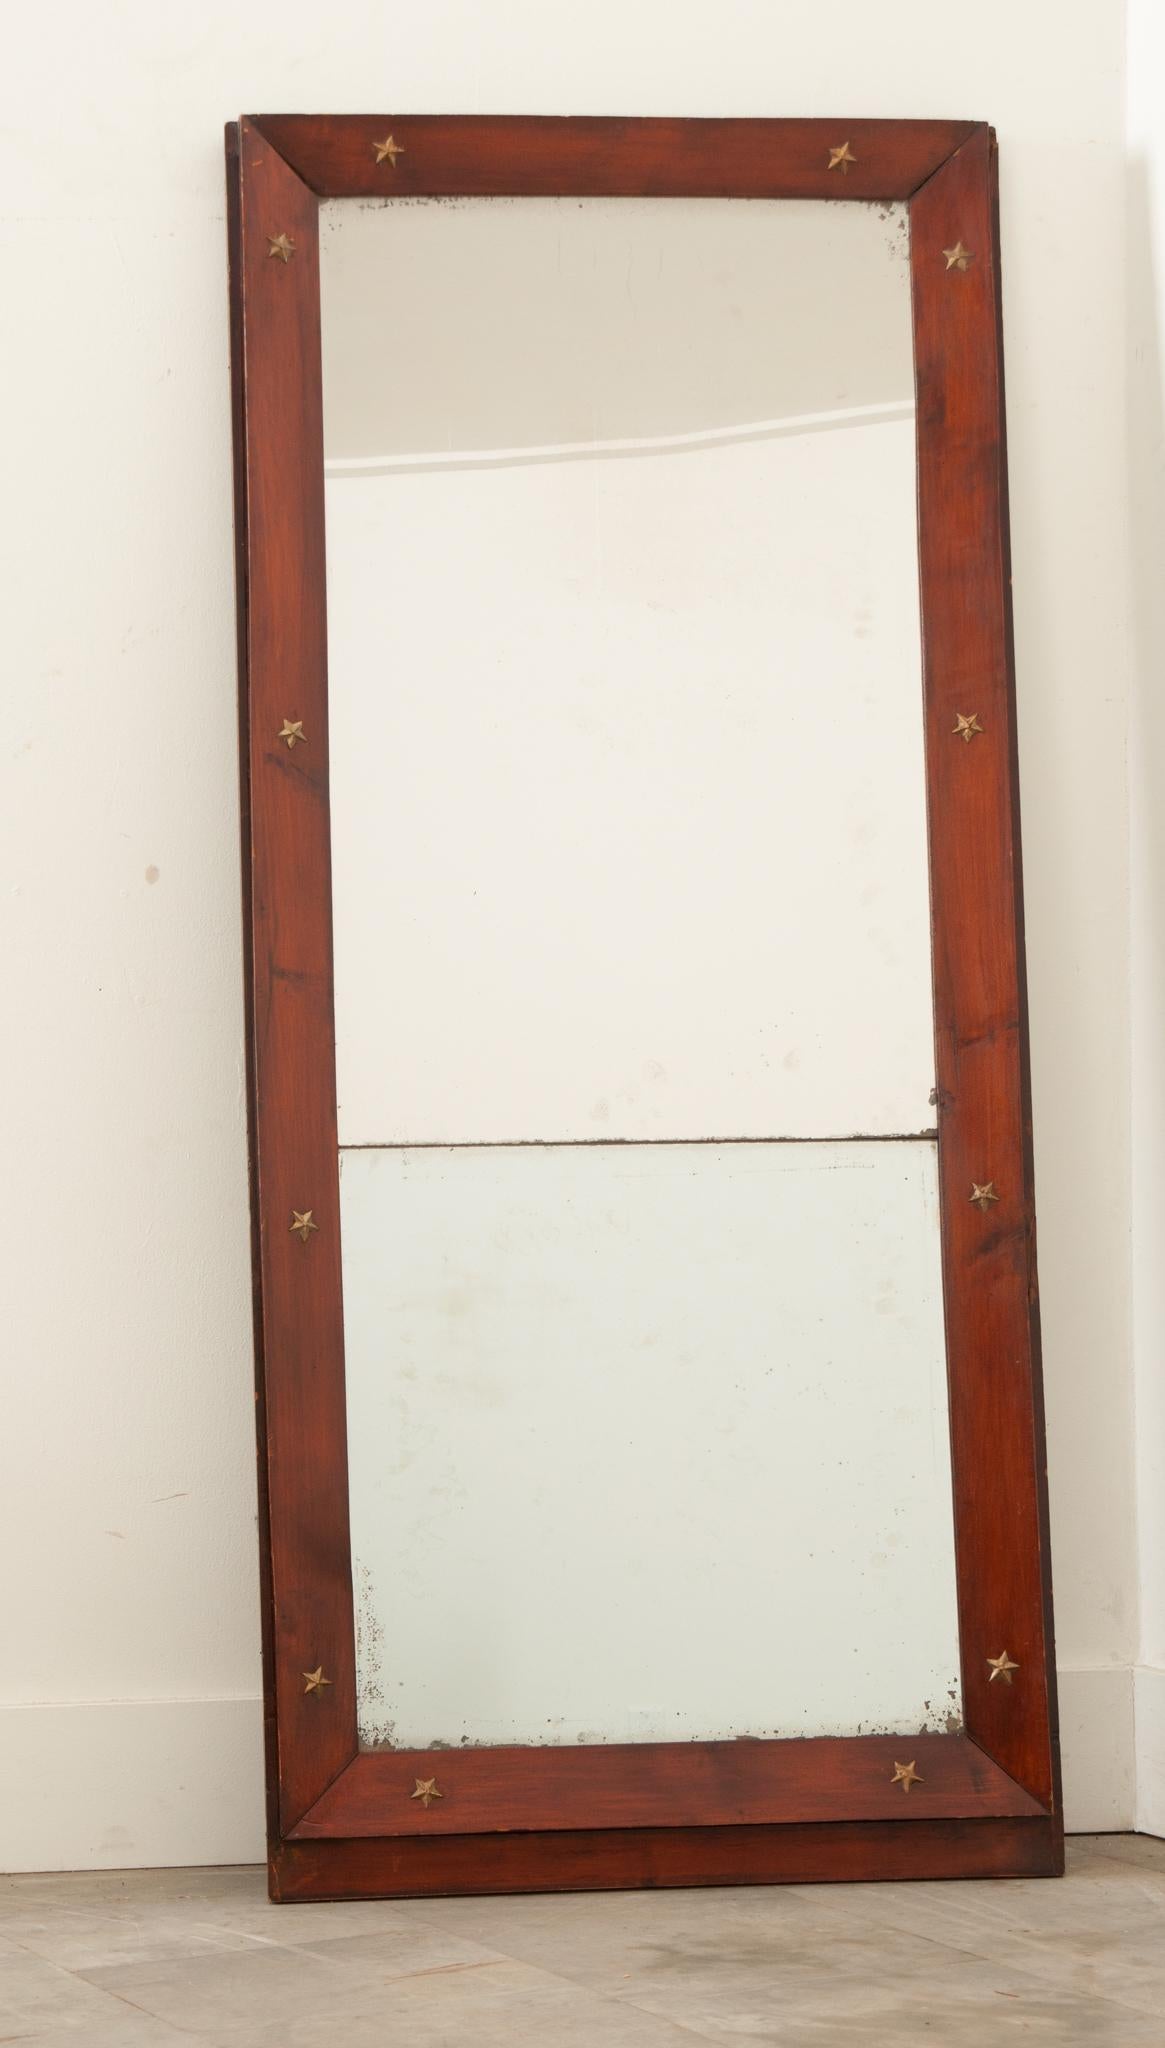 A courtly, Empire mirror from France with its original mirror plate. The frame is made of beveled mahogany decorated with gilt bronze stars, a motif commonly found throughout the Empire style. Dating circa 1860, this mirror is truly striking, as the